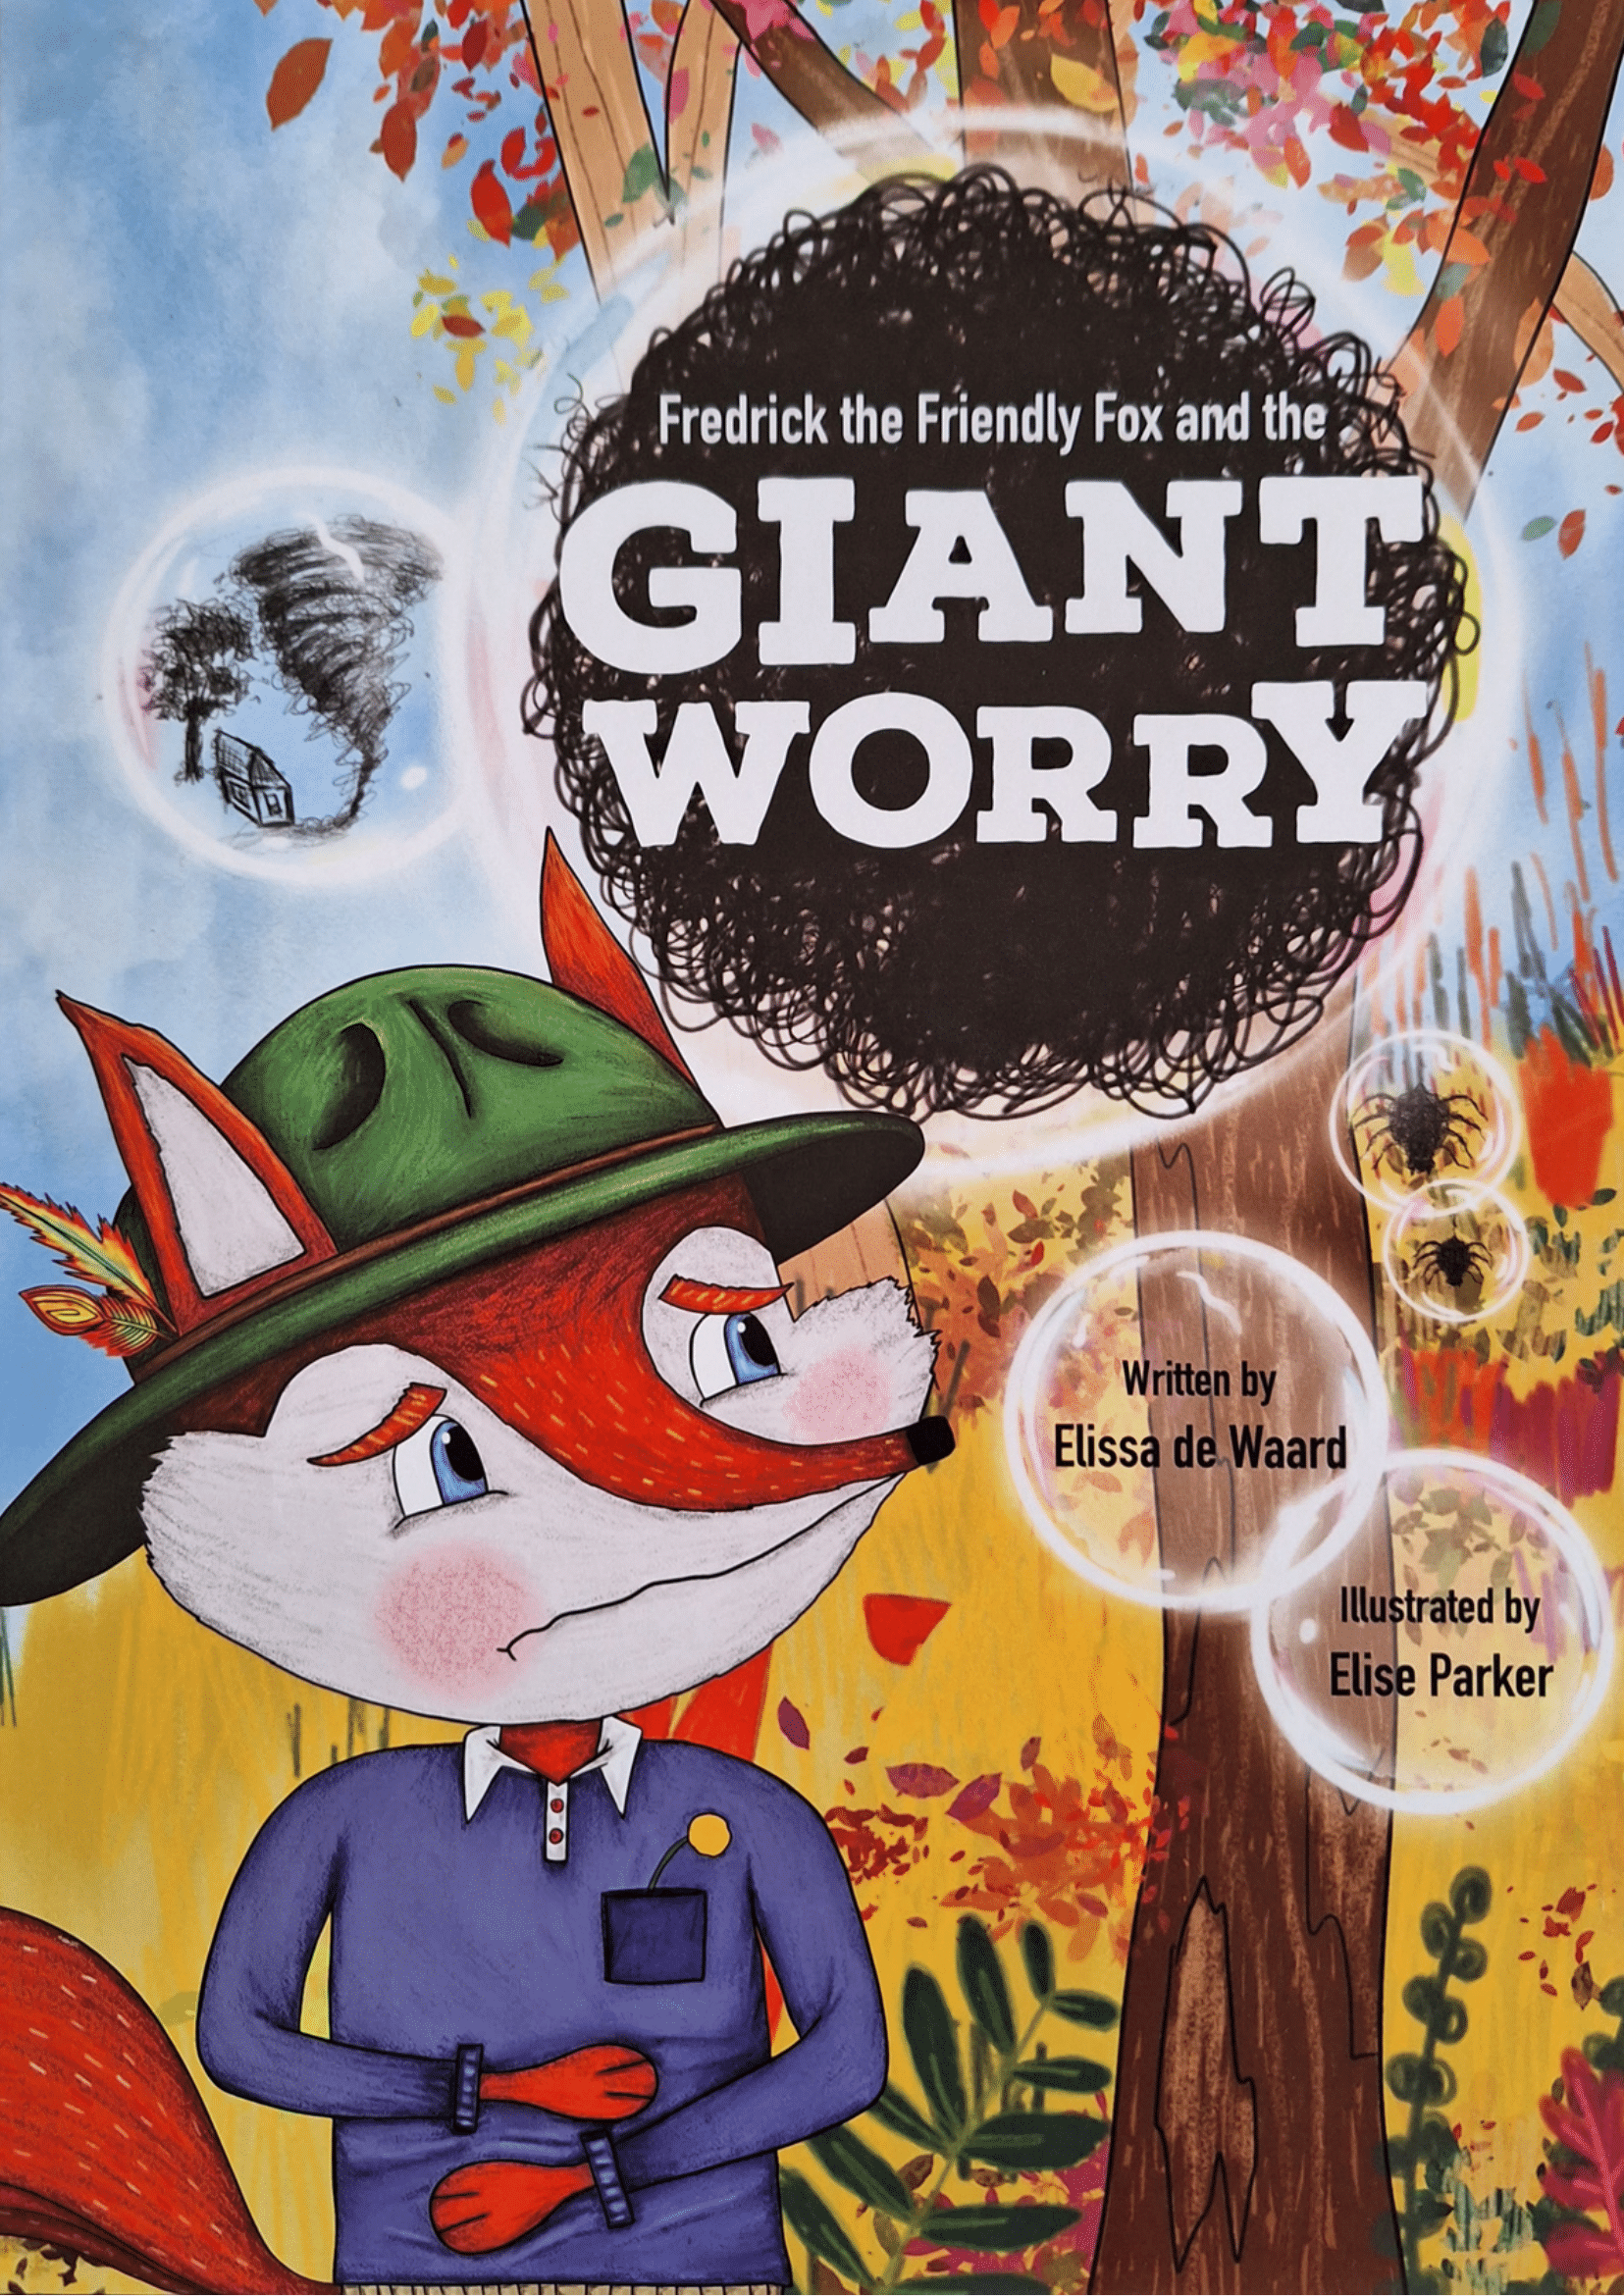 FREDRICK THE FRIENDLY FOX AND THE GIANT WORRY